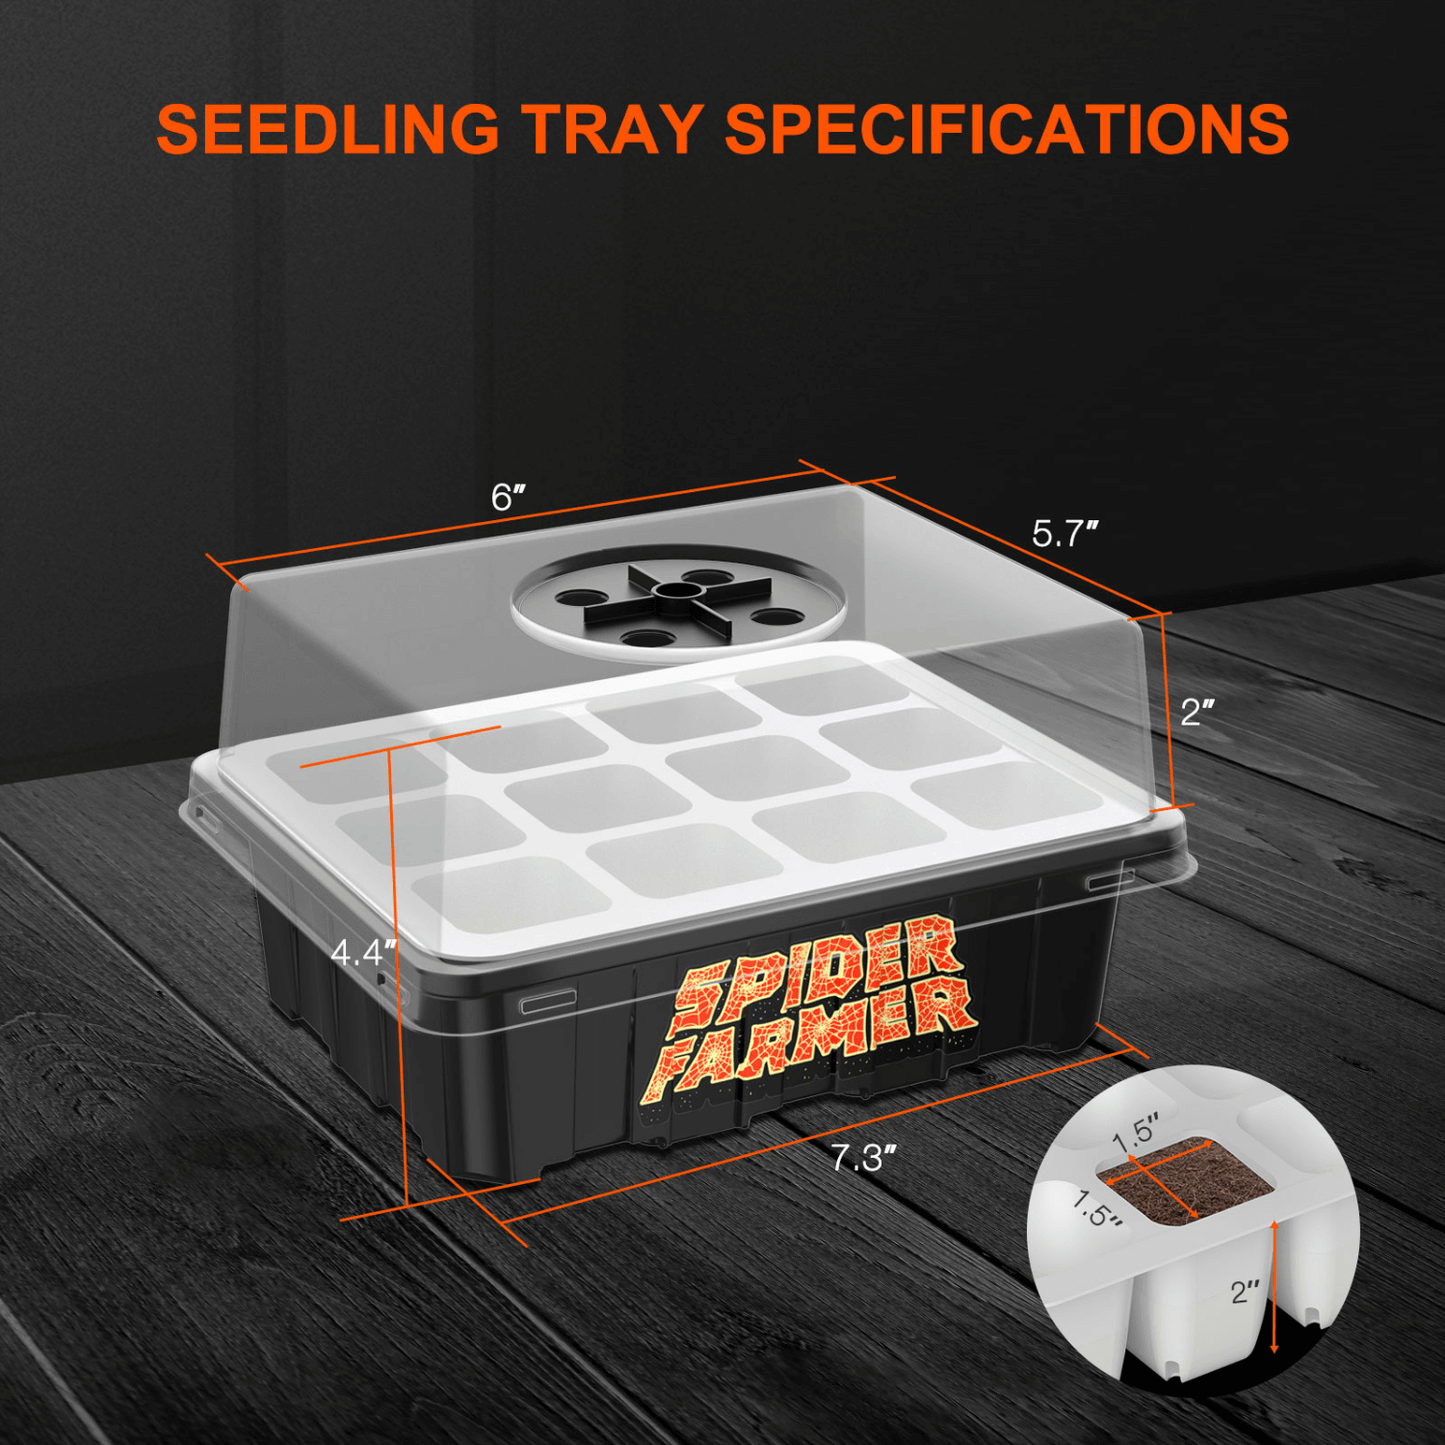 Spider Farmer Seed Starting Trays 2 Pack SPIDER-SF-SeedTray Accessories 6973280379576